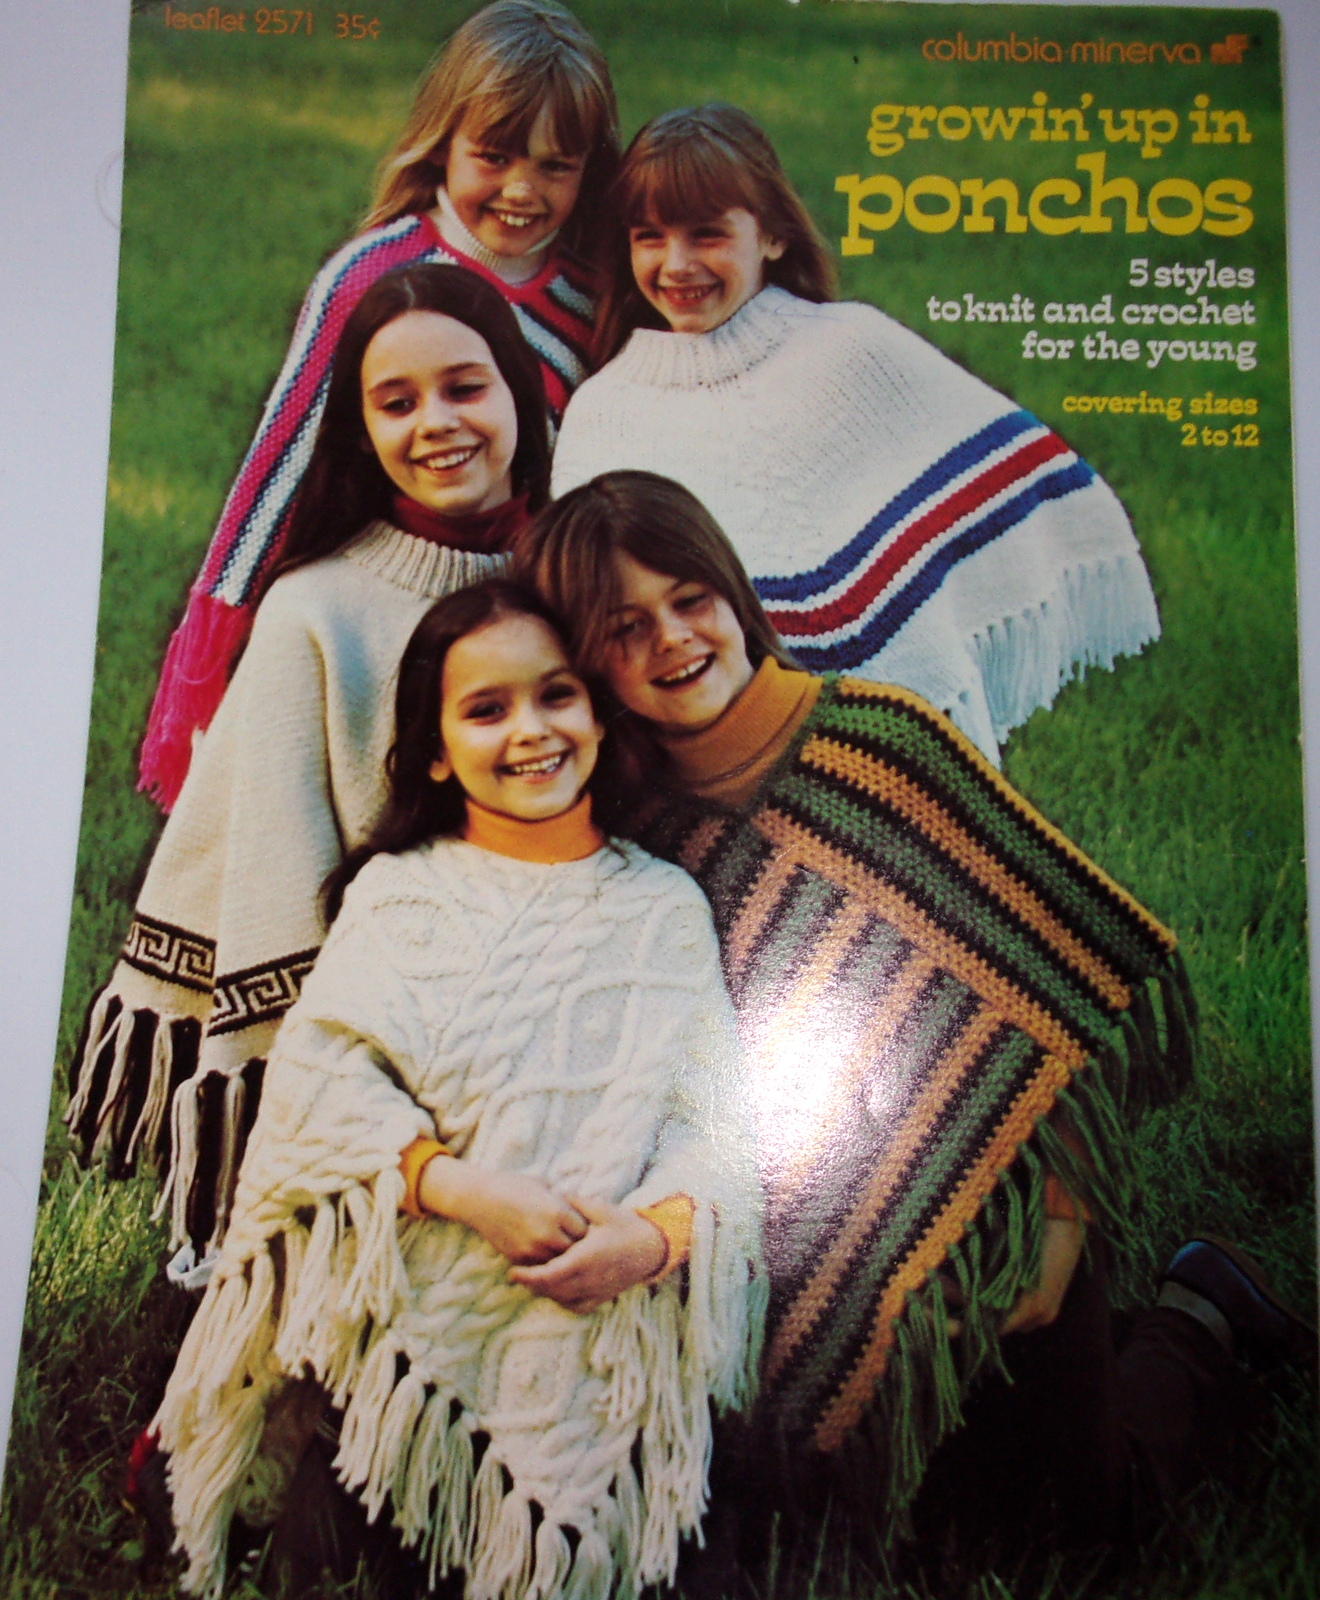 Columbia Minerva Growin’ Up In Ponchos 5 Styles to Knit & Crochet 1973 - $3.99